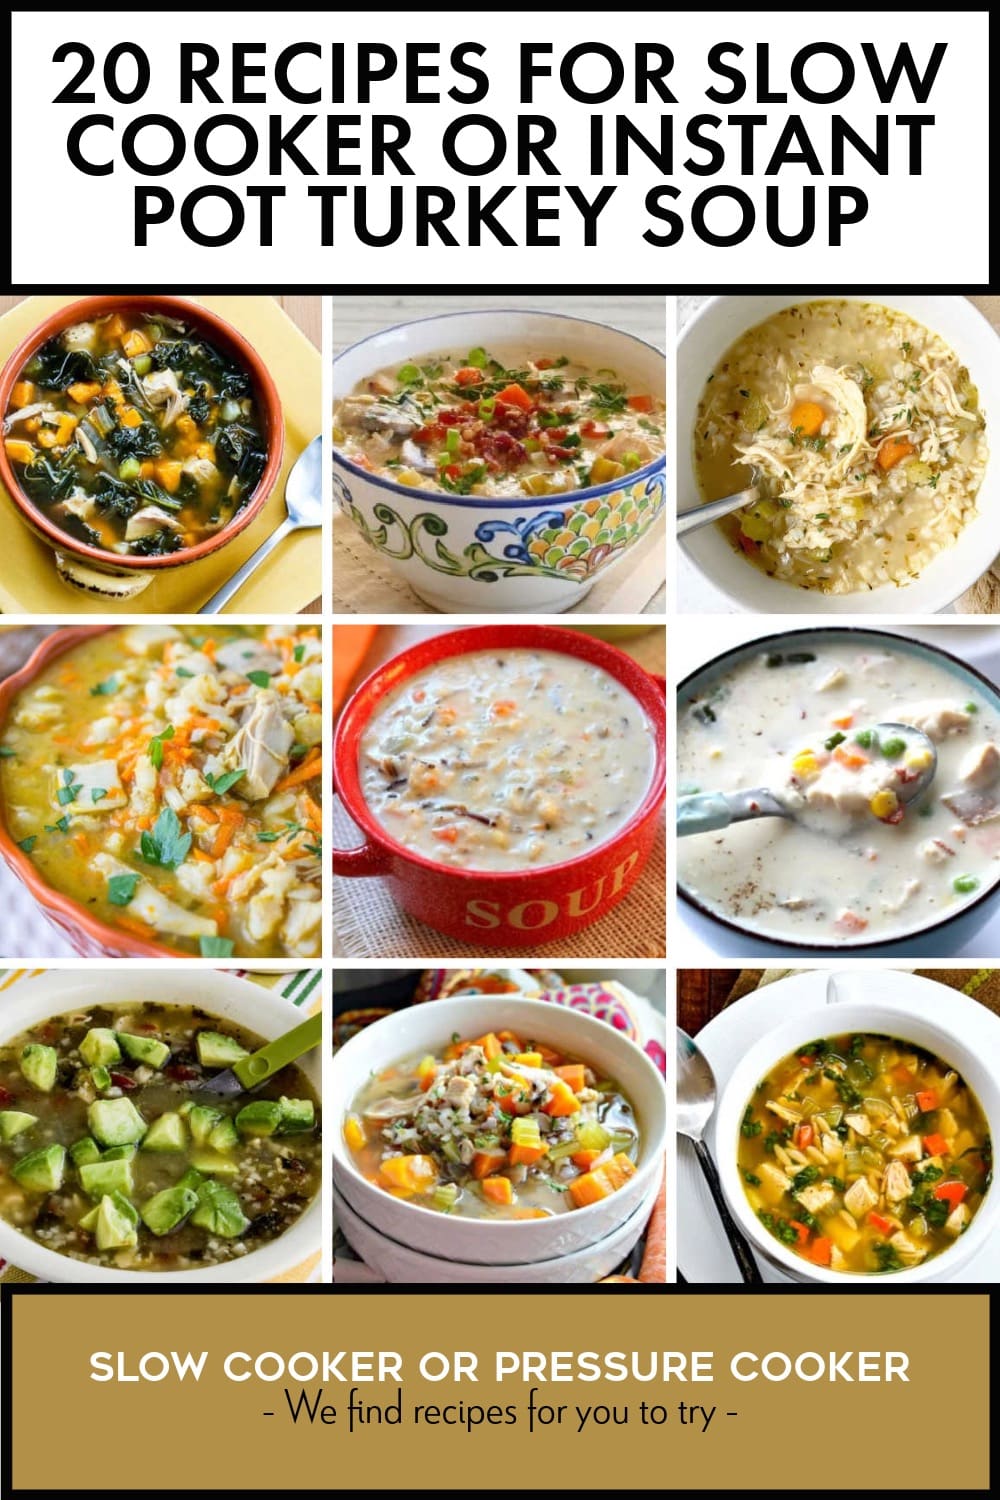 Pinterest image of 20 Recipes for Slow Cooker or Instant Pot Turkey Soup